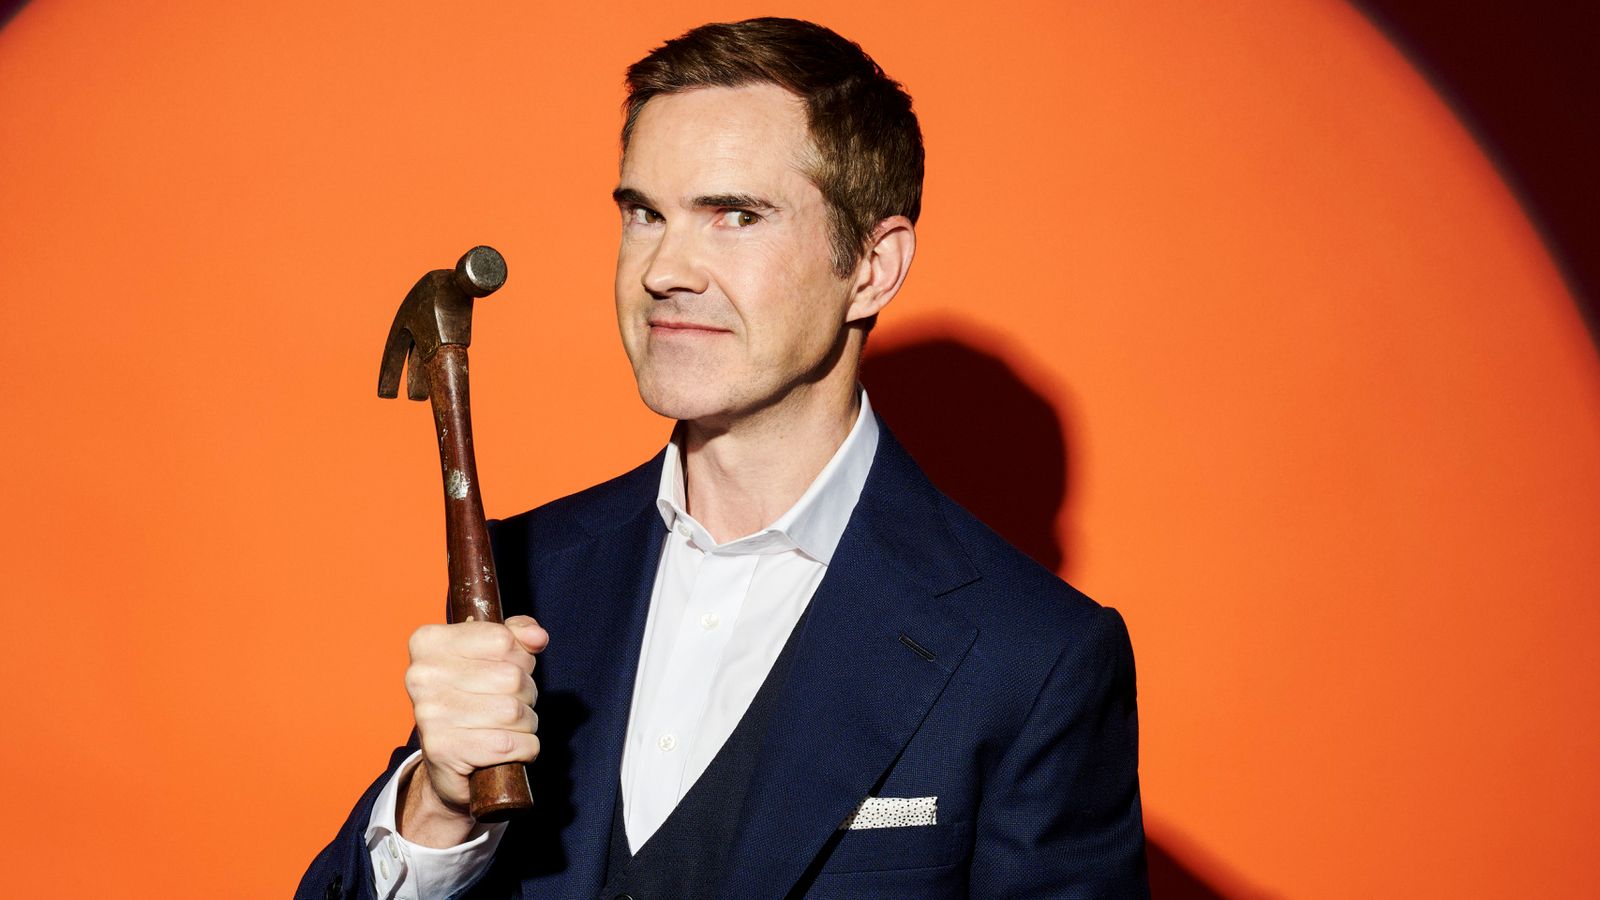 Jimmy Carr Destroys Art: Holocaust charity slams Channel 4 show offering audience chance to destroy Hitler's art